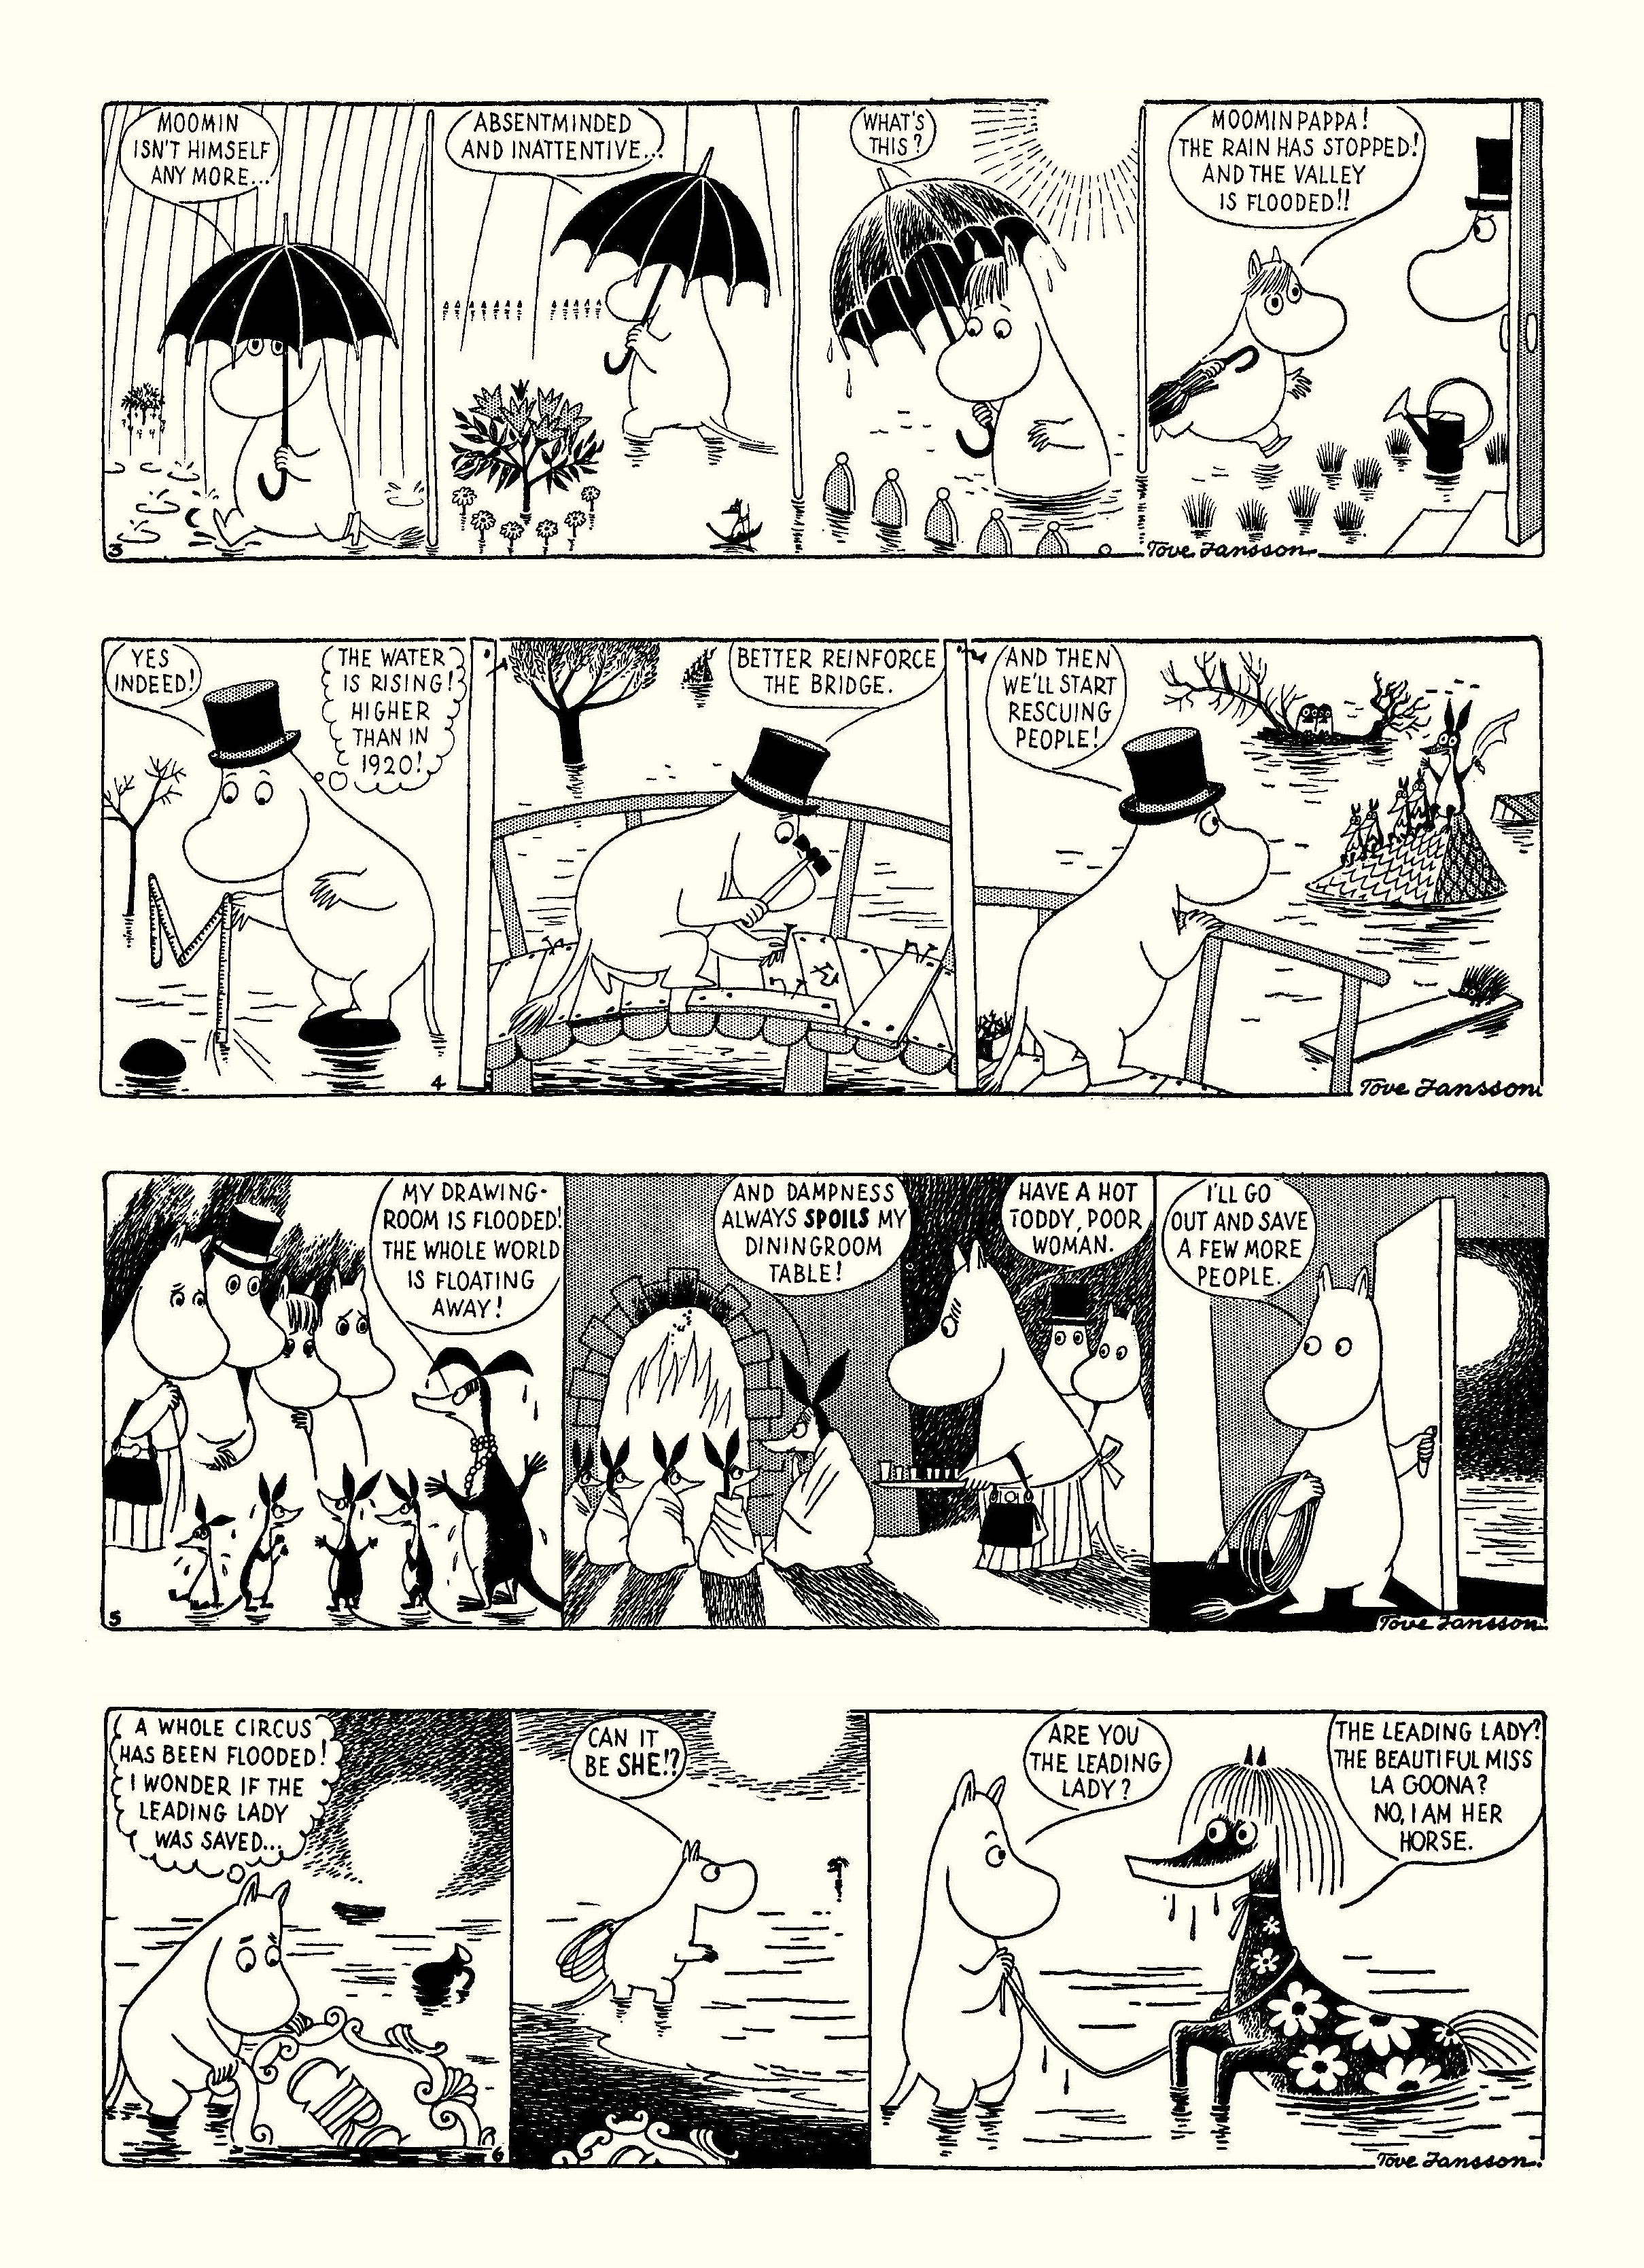 Read online Moomin: The Complete Tove Jansson Comic Strip comic -  Issue # TPB 3 - 7